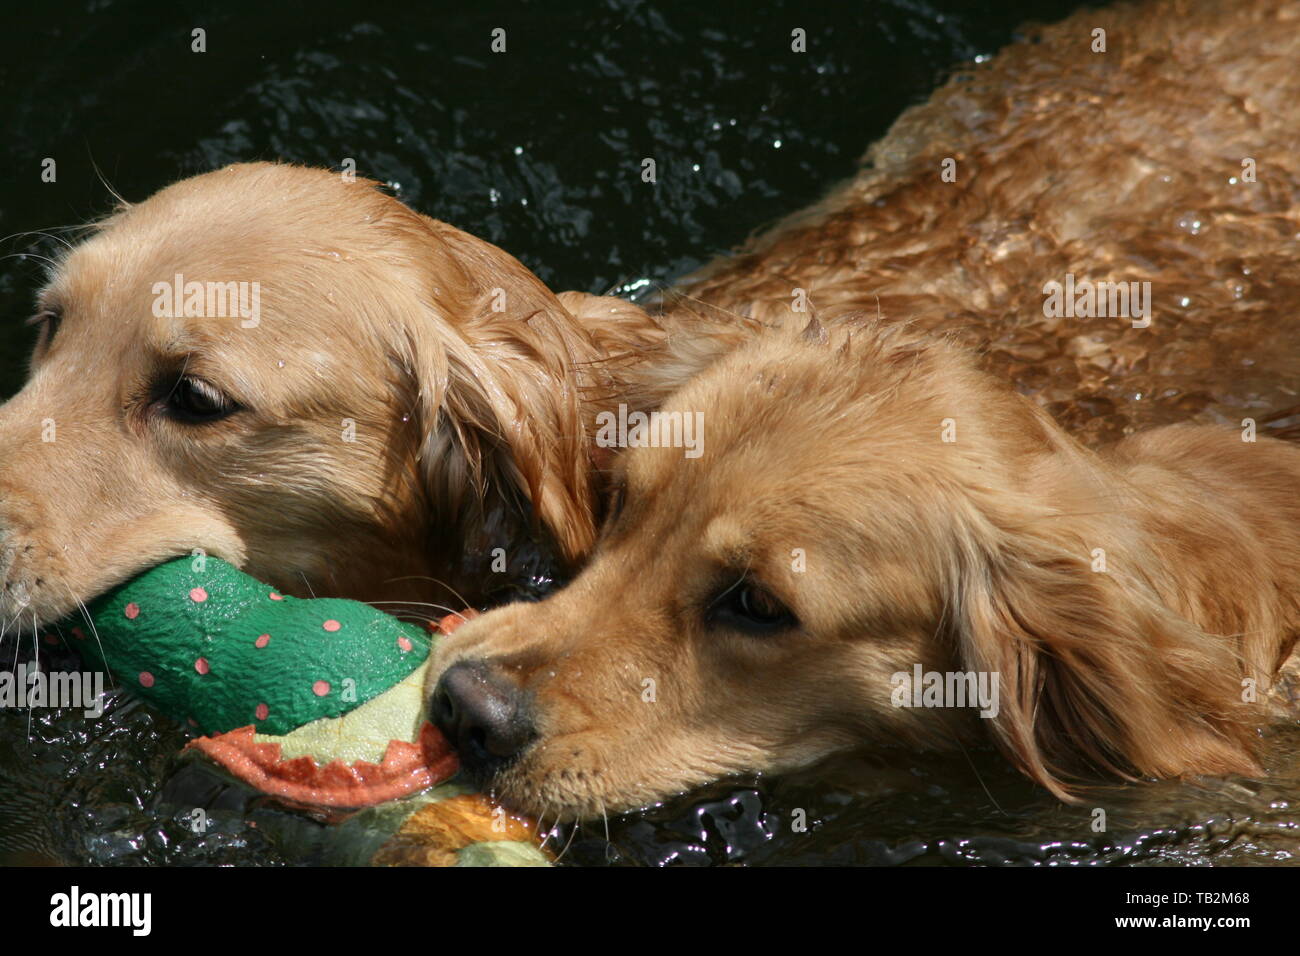 Golden Retrievers Swimming with toy in their mouths in a Pond Stock Photo